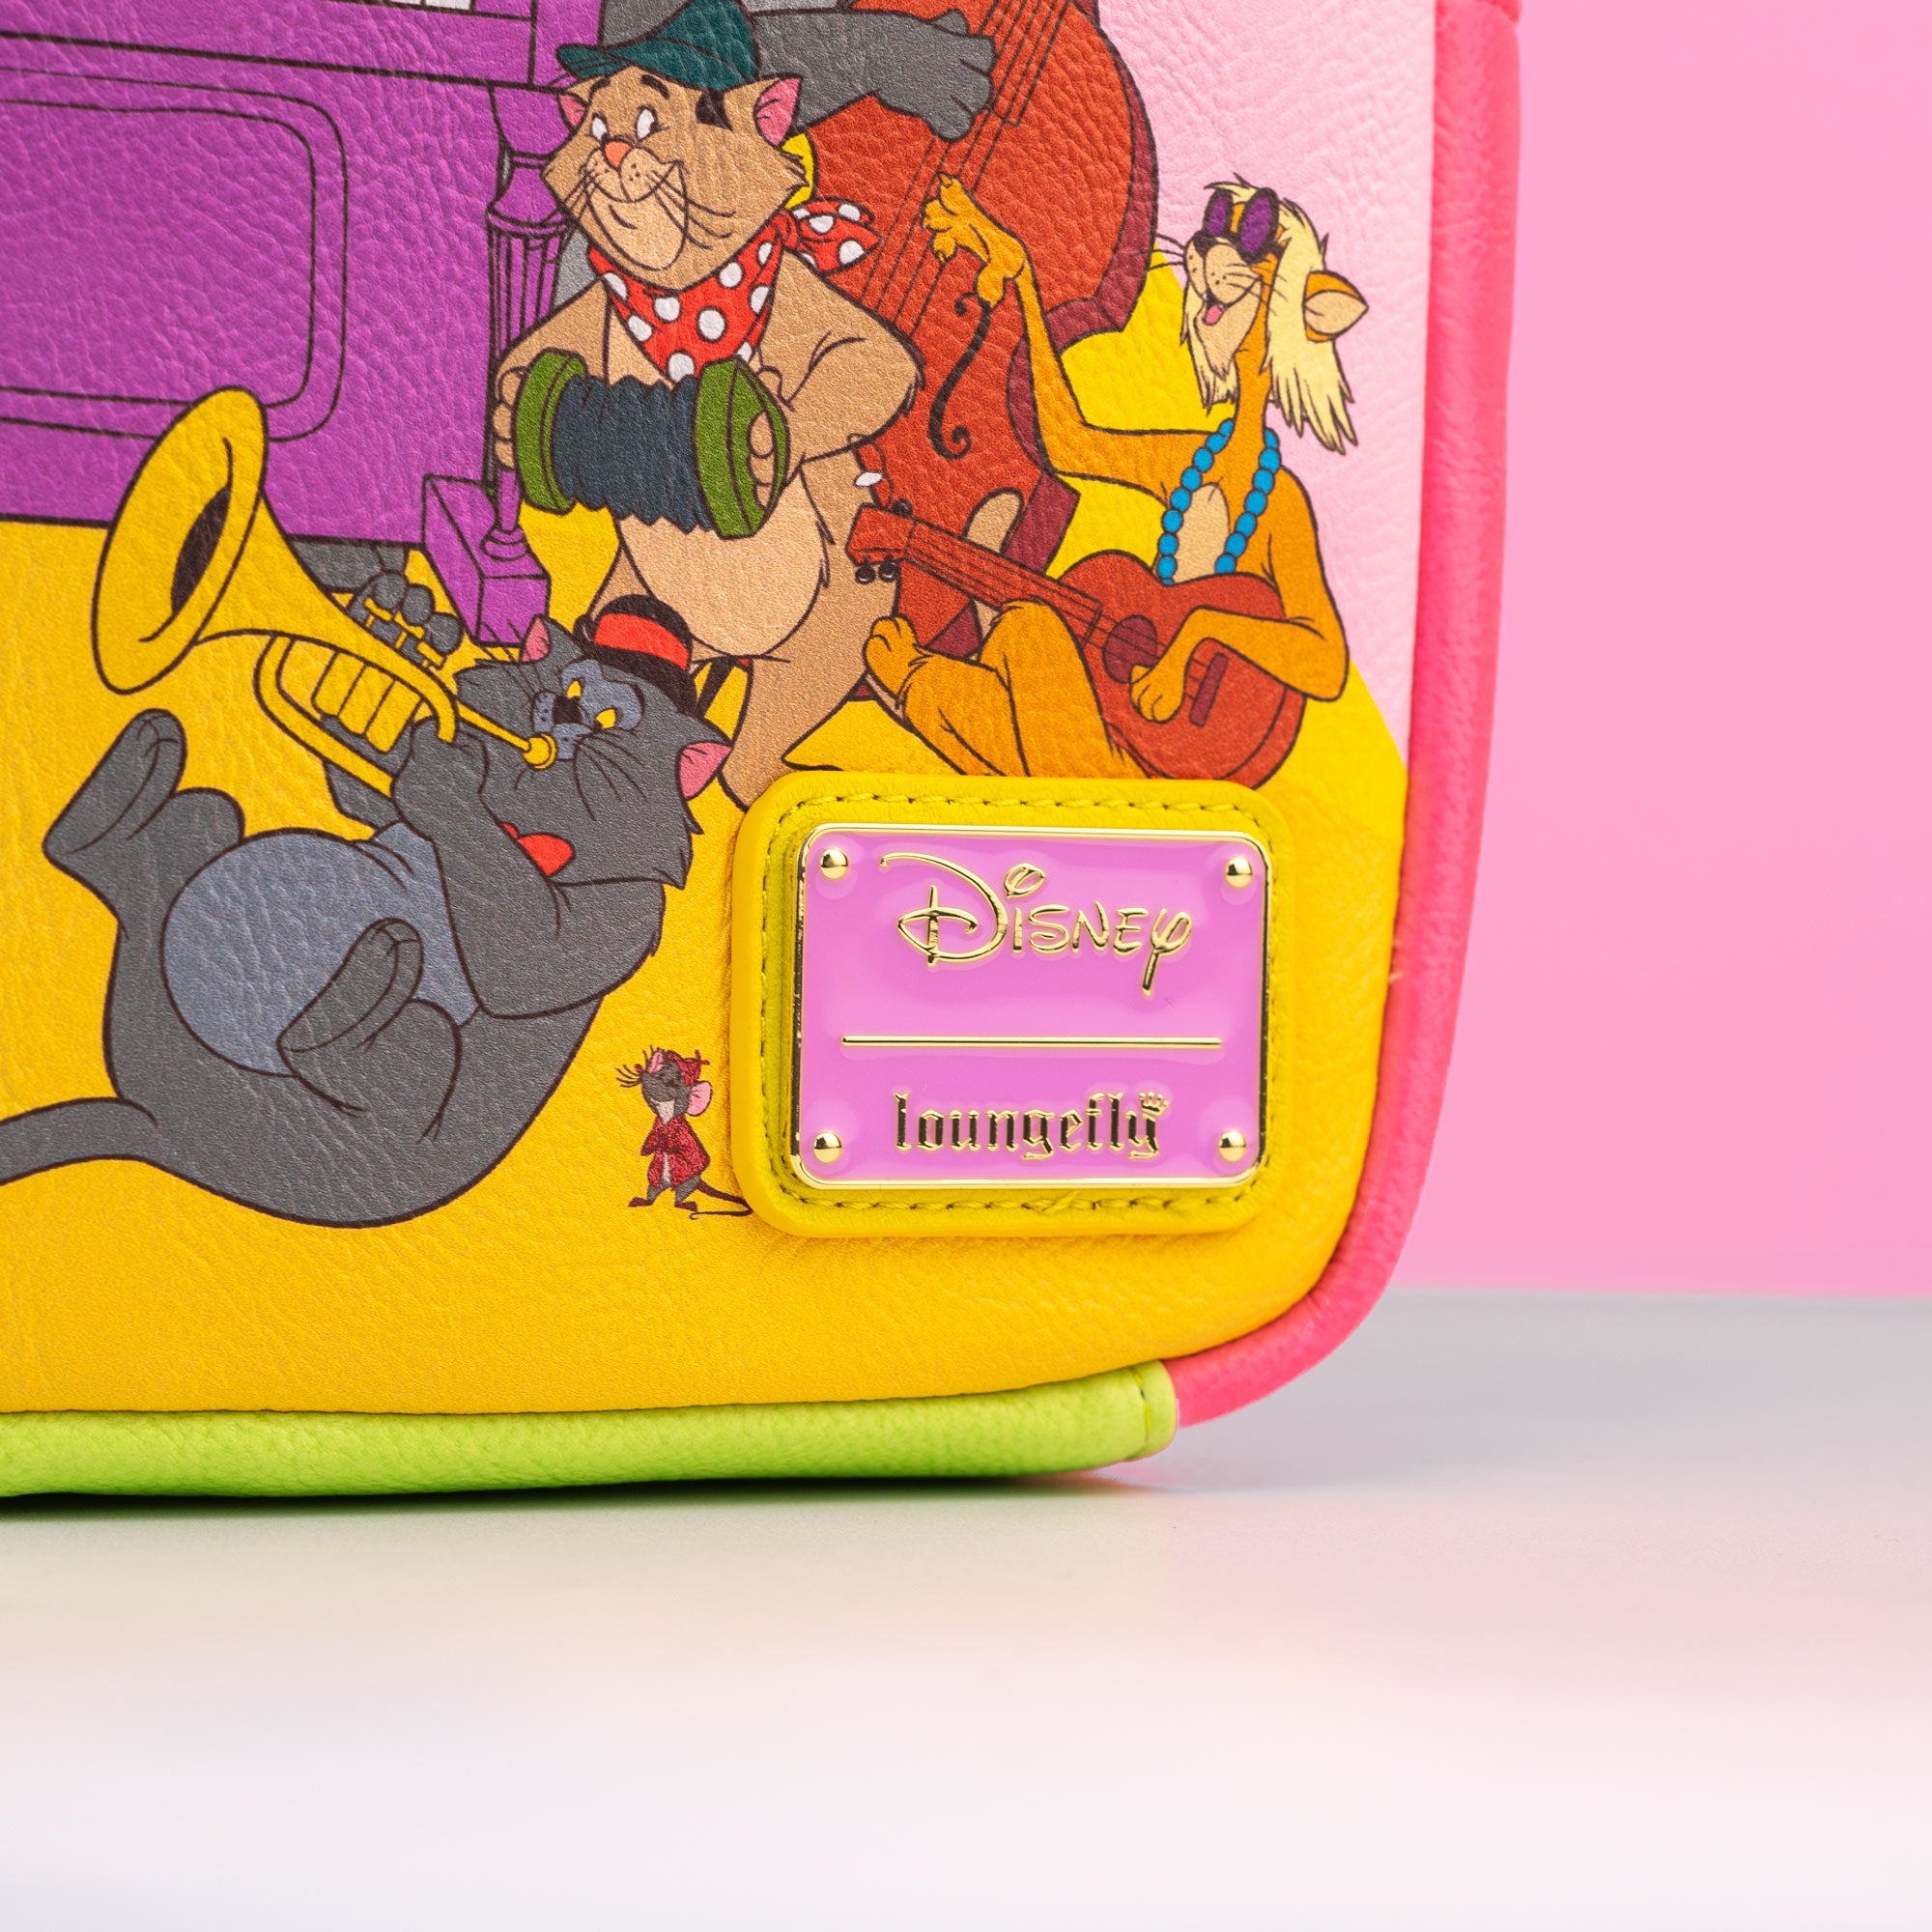 Loungefly x Disney The Aristocats Jazz Party Mini Backpack - GeekCore